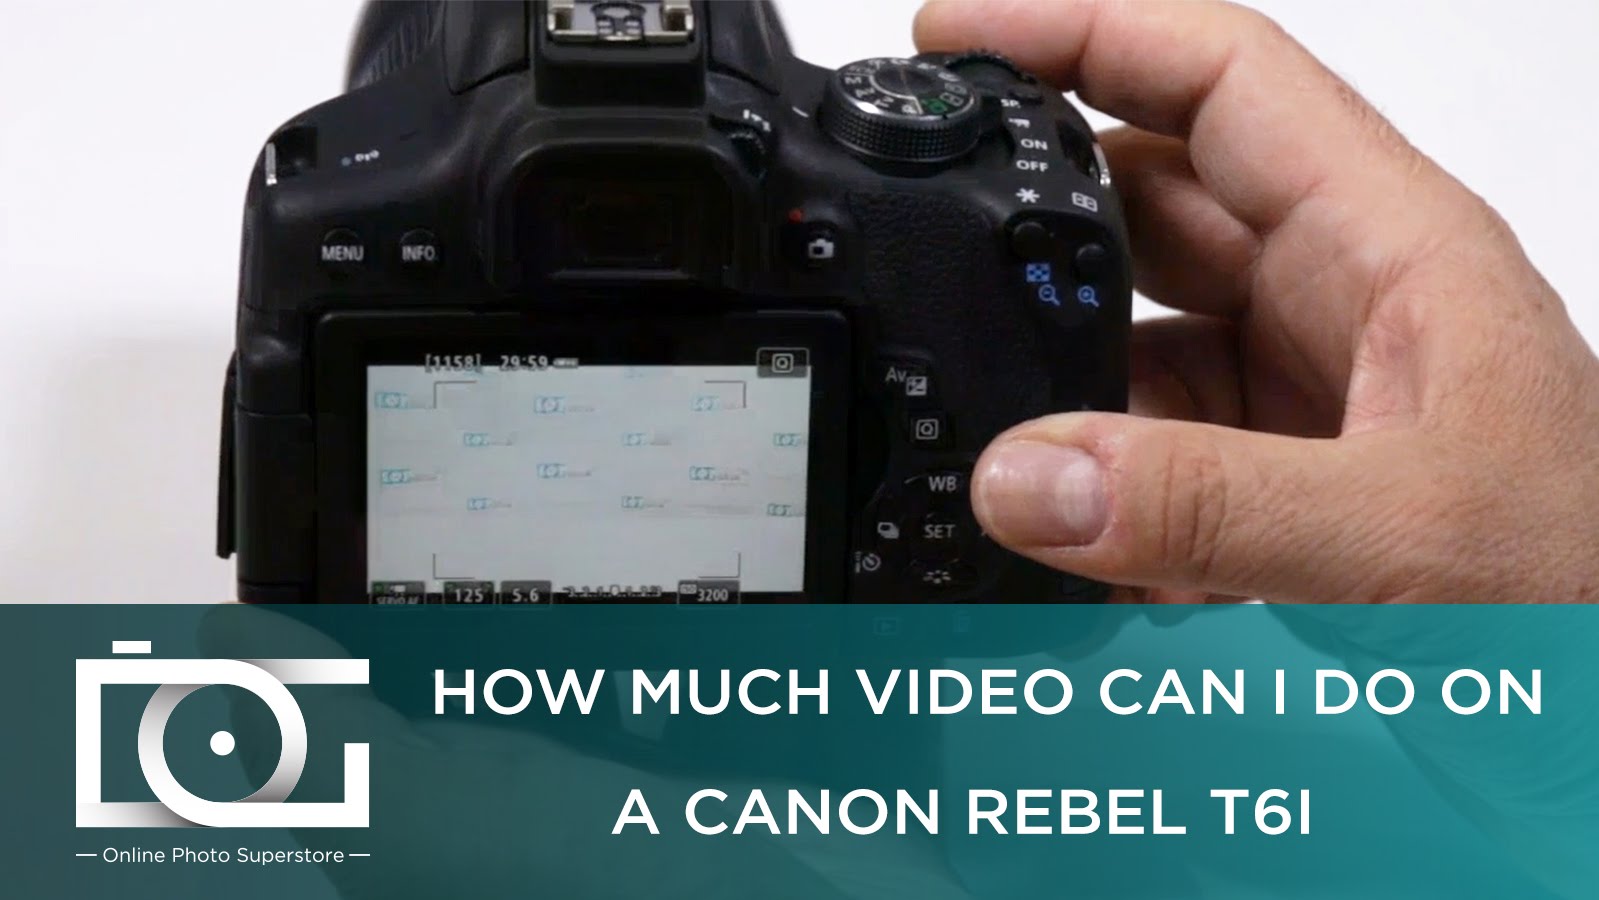 TUTORIAL | How Much Video Can I Do On CANON Rebel T6i Cameras